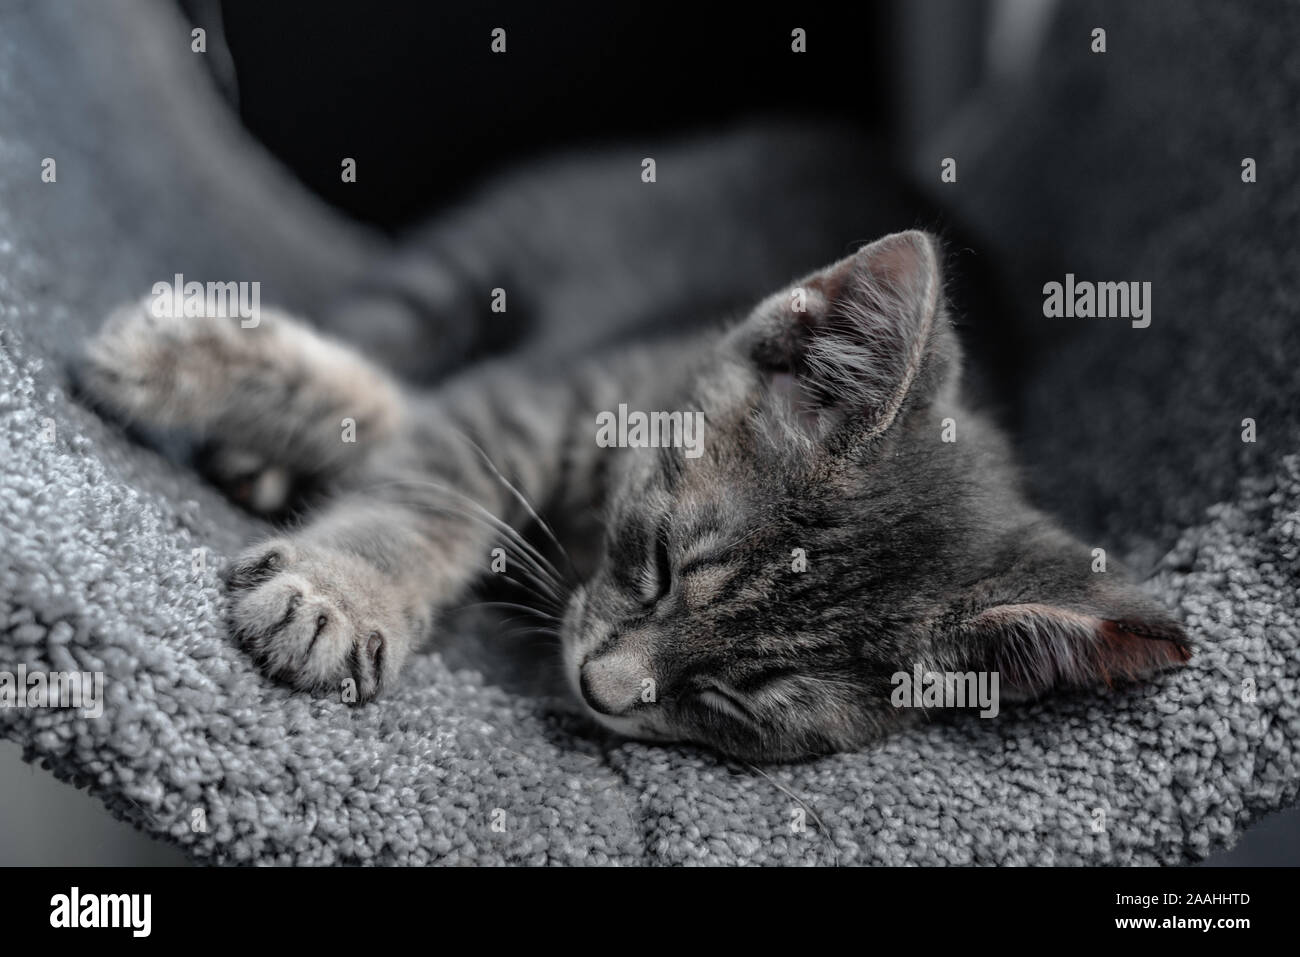 Cute short-haired grey kitten sleeping in a cat tree during the daytime. Stock Photo